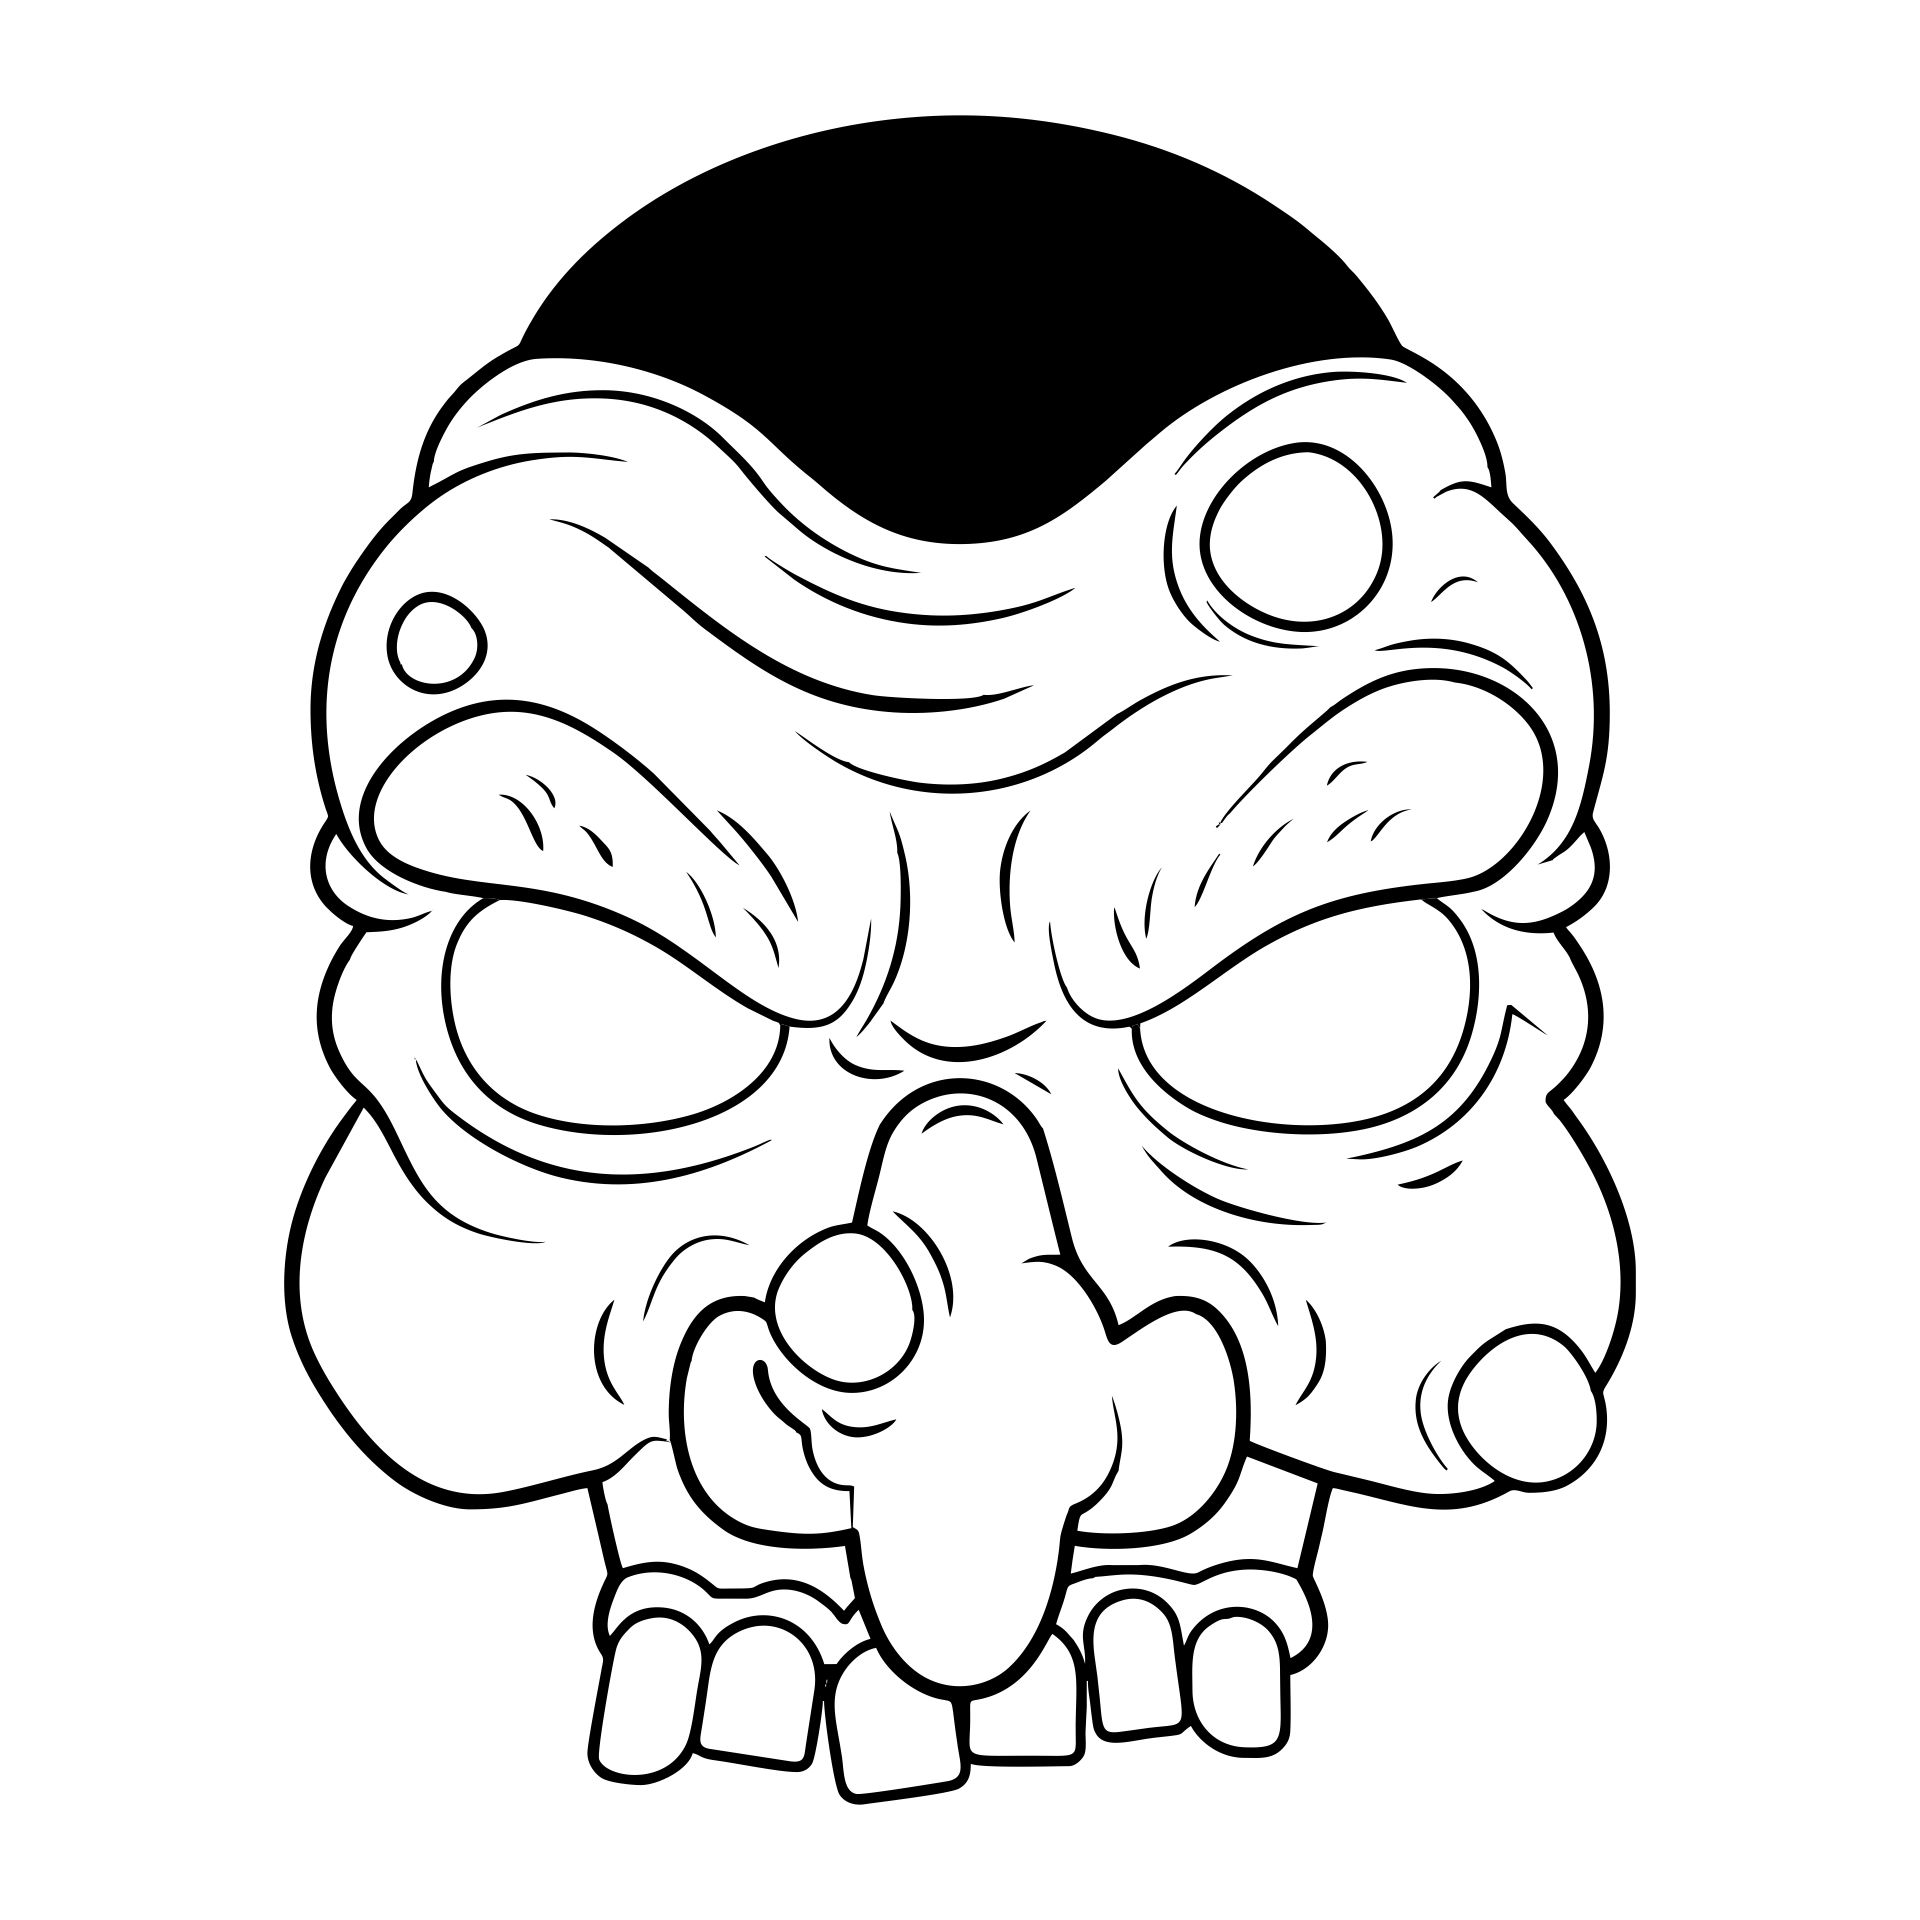 Free Halloween Scary Masks Coloring Pages